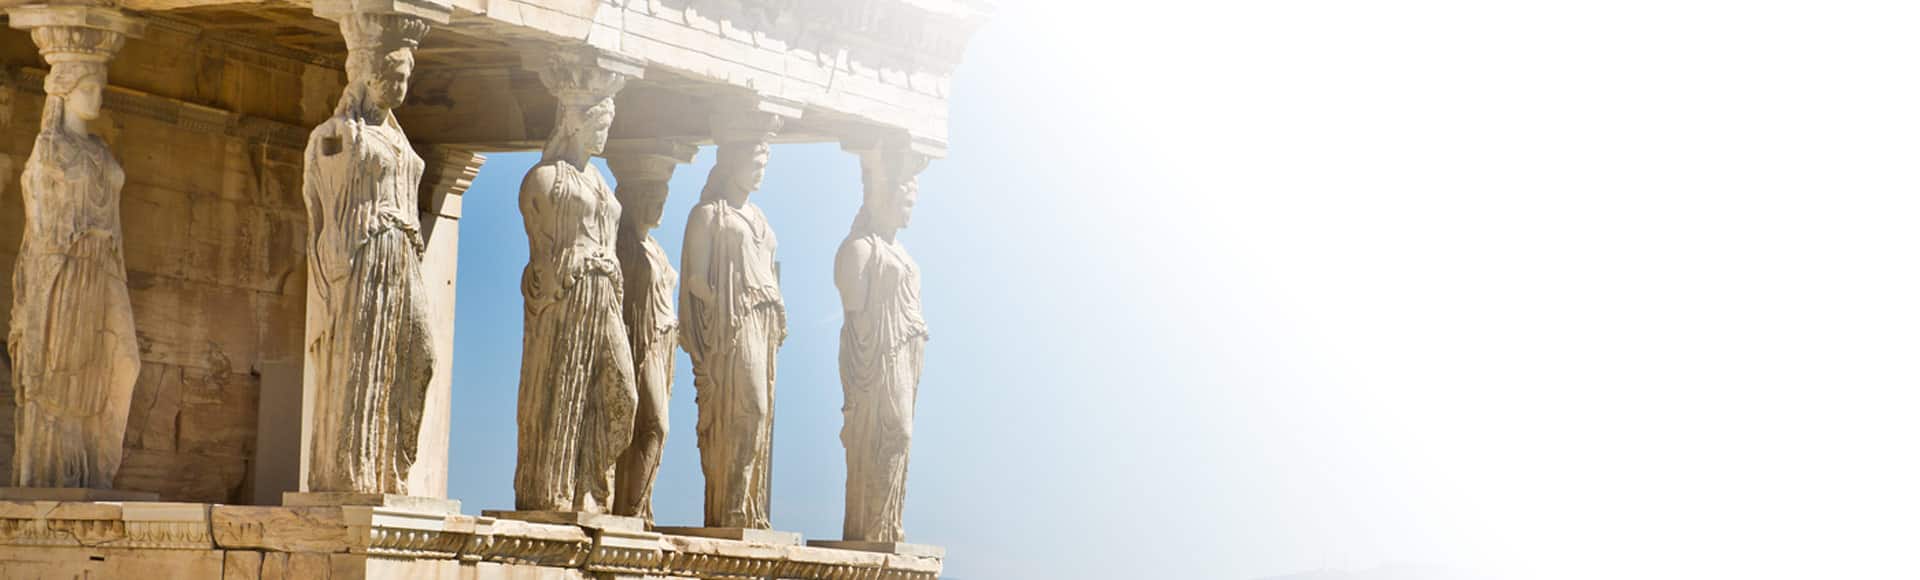 Explore the Acropolis in Athens, Greece on a sea excursion through ancient history with Oceania Cruises.